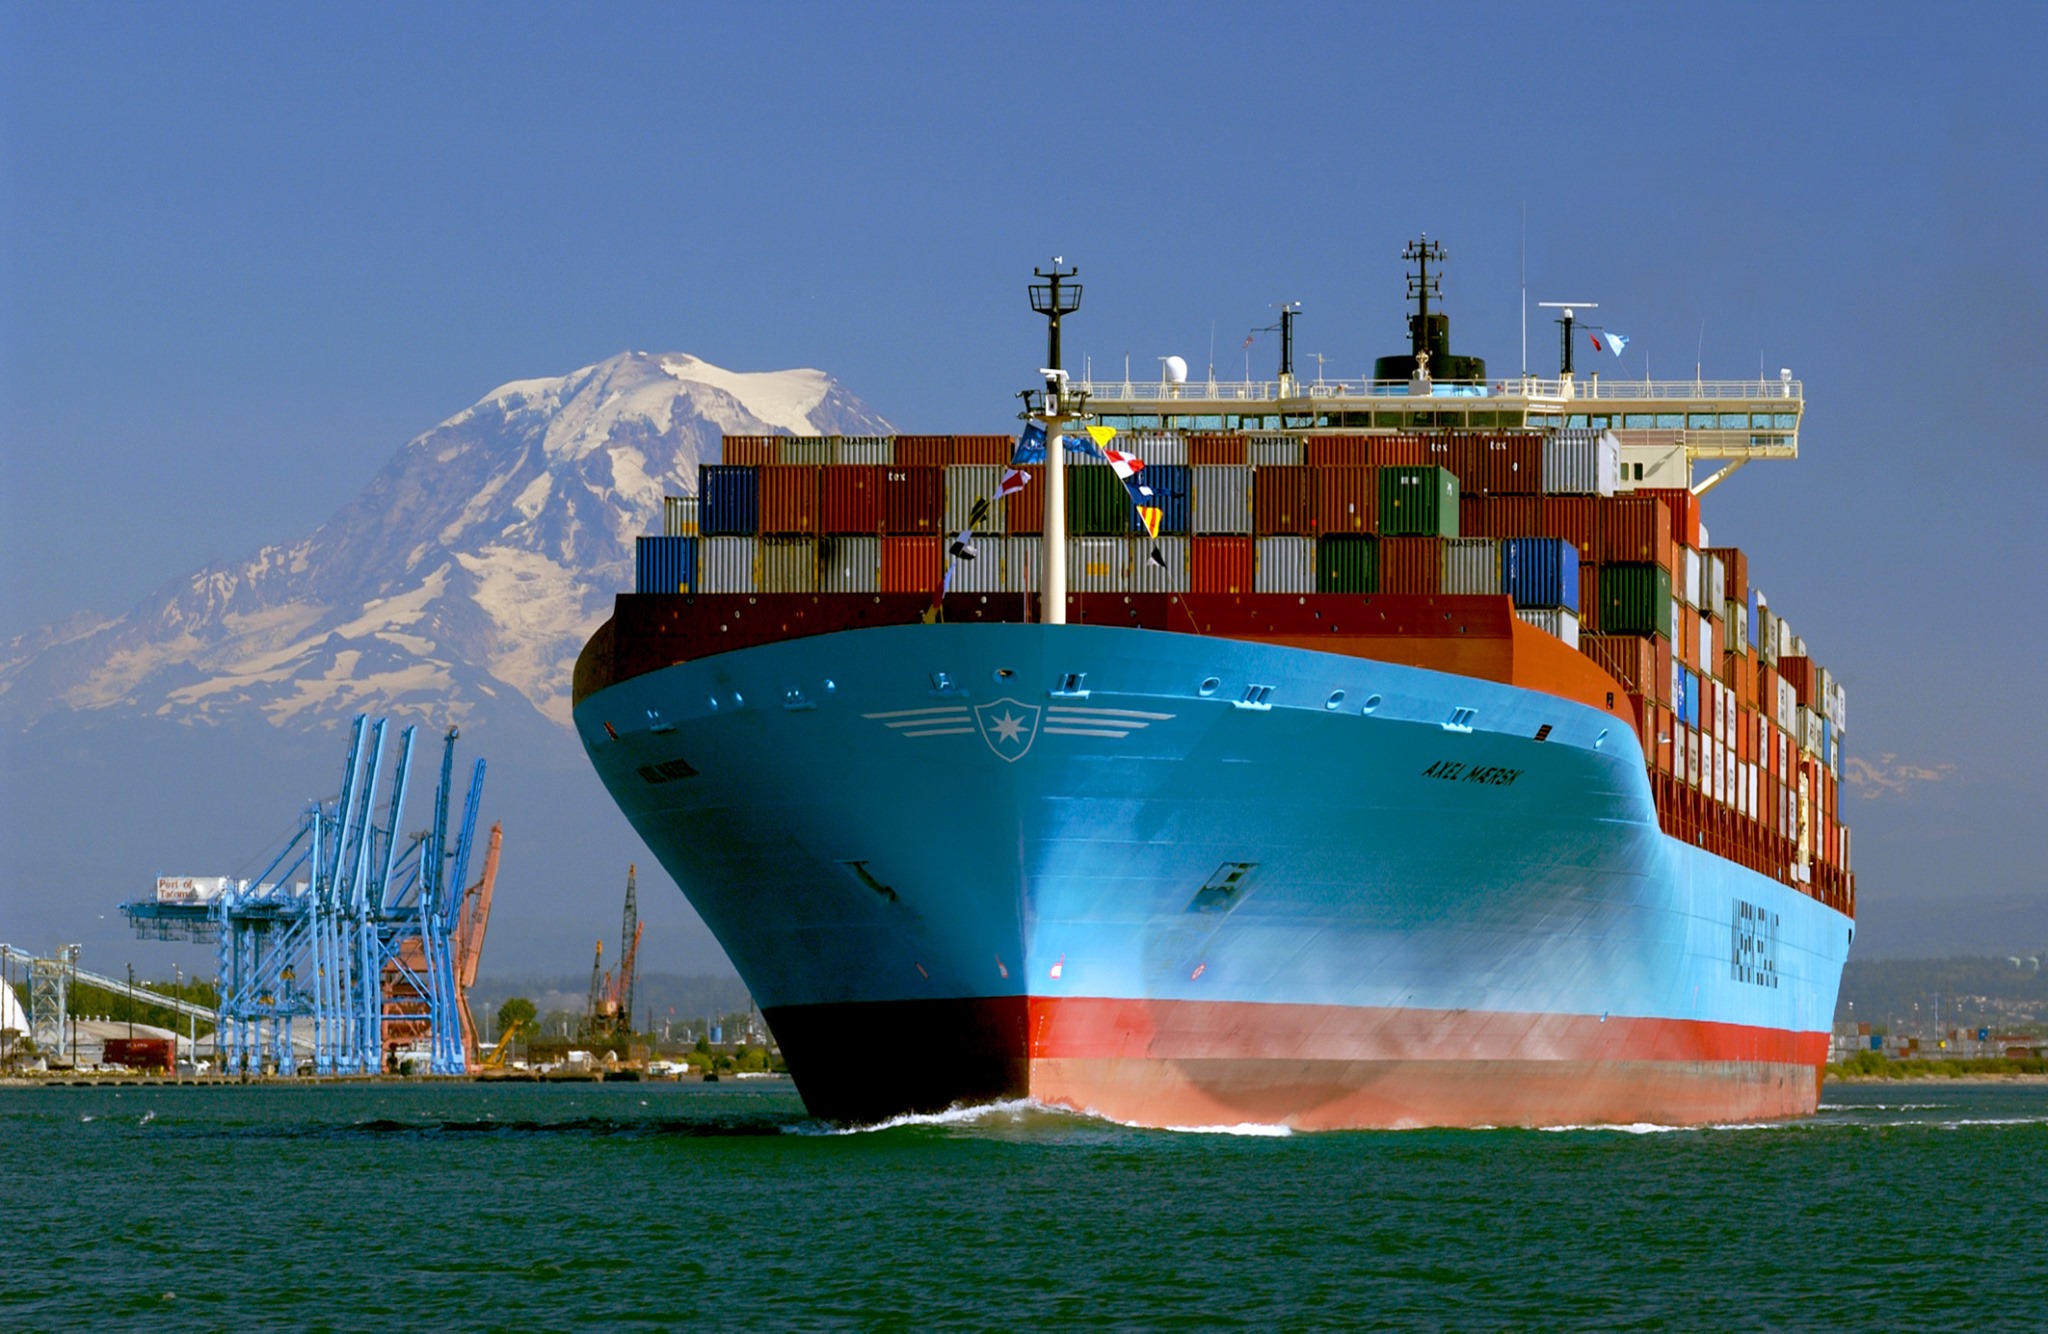 Maersk joins forces with H&M on decarbonizing logistic - Scandasia